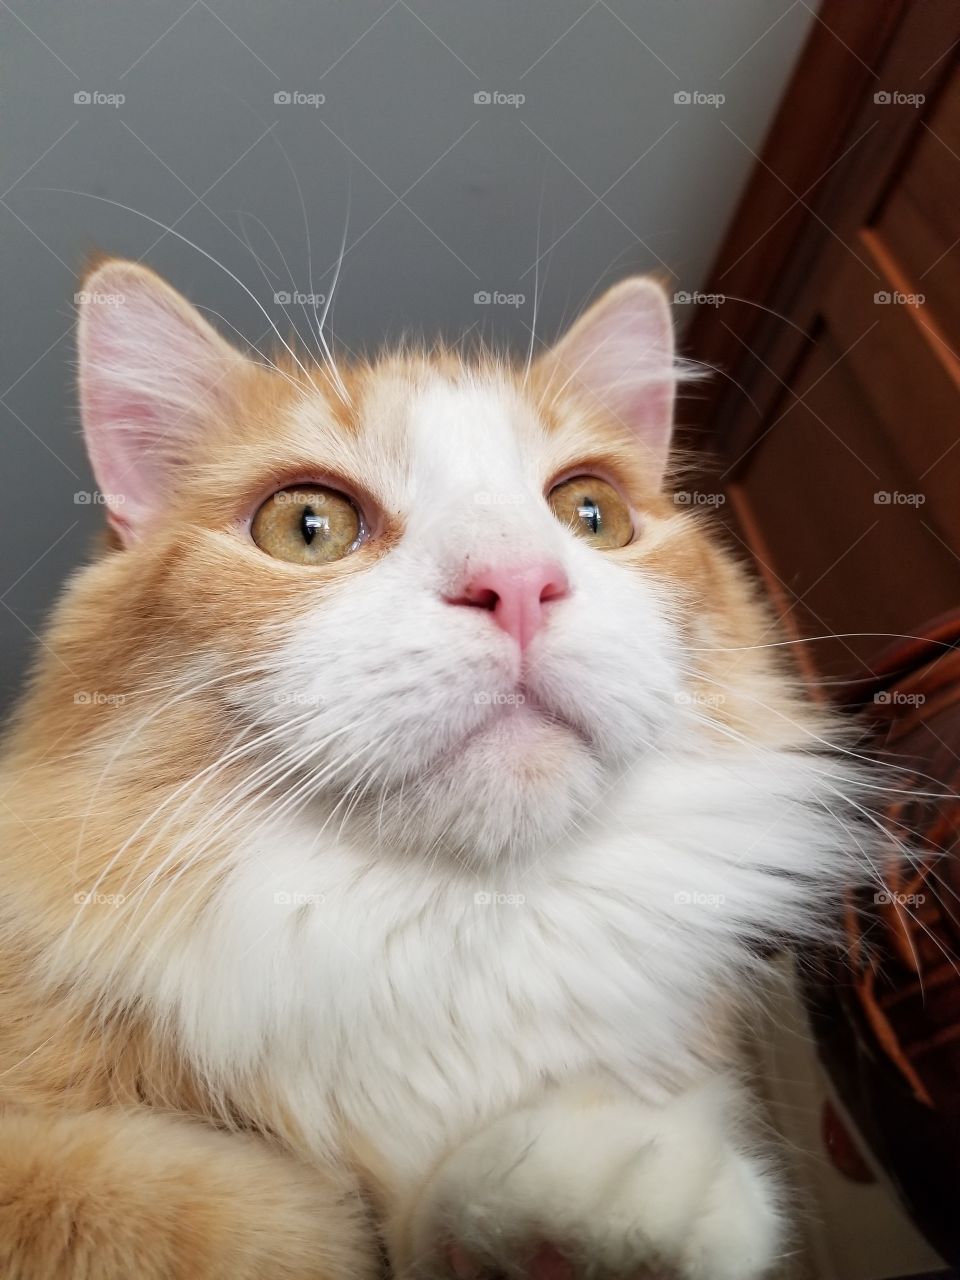 Fluffy Orange Cat on top of the refrigerator looking out the window